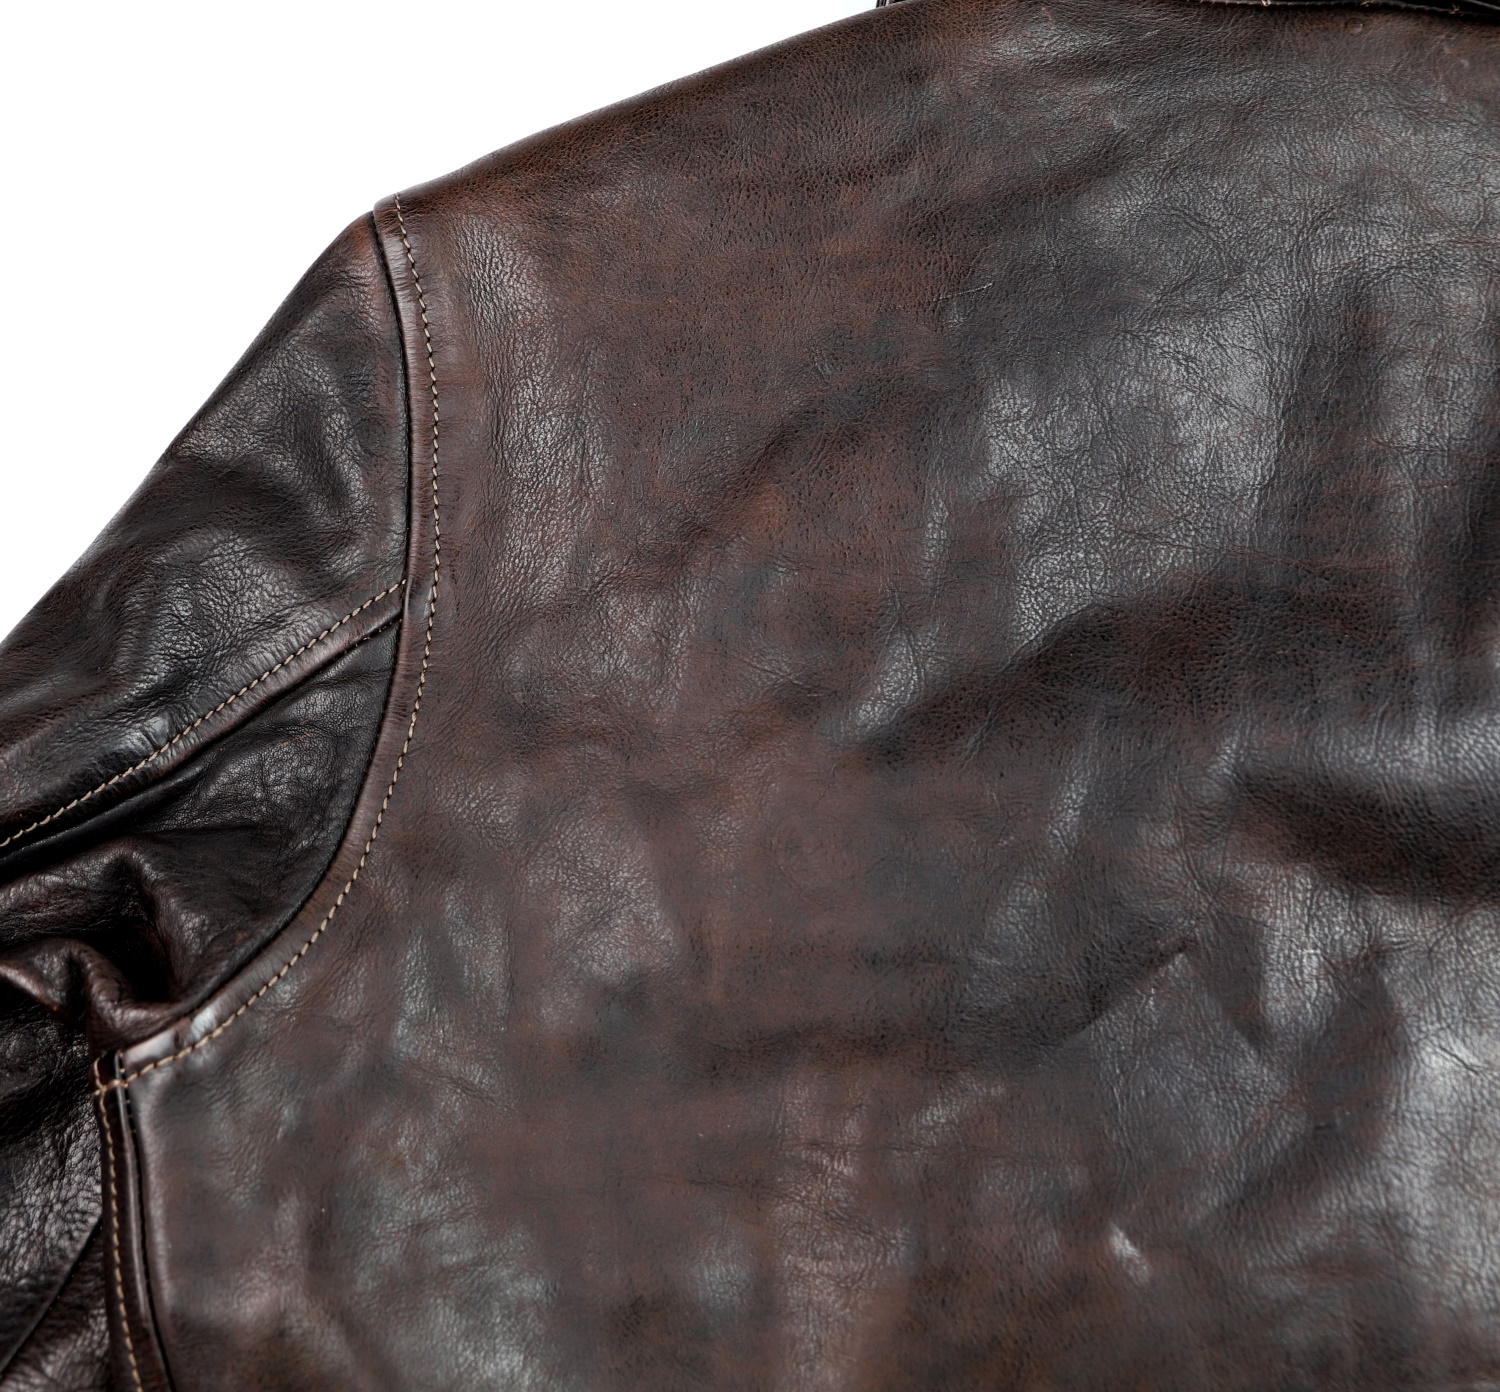 Thedi Markos Zip-Up Shawl Collar Brown Canneto Cowhide L1 upper back.jpg